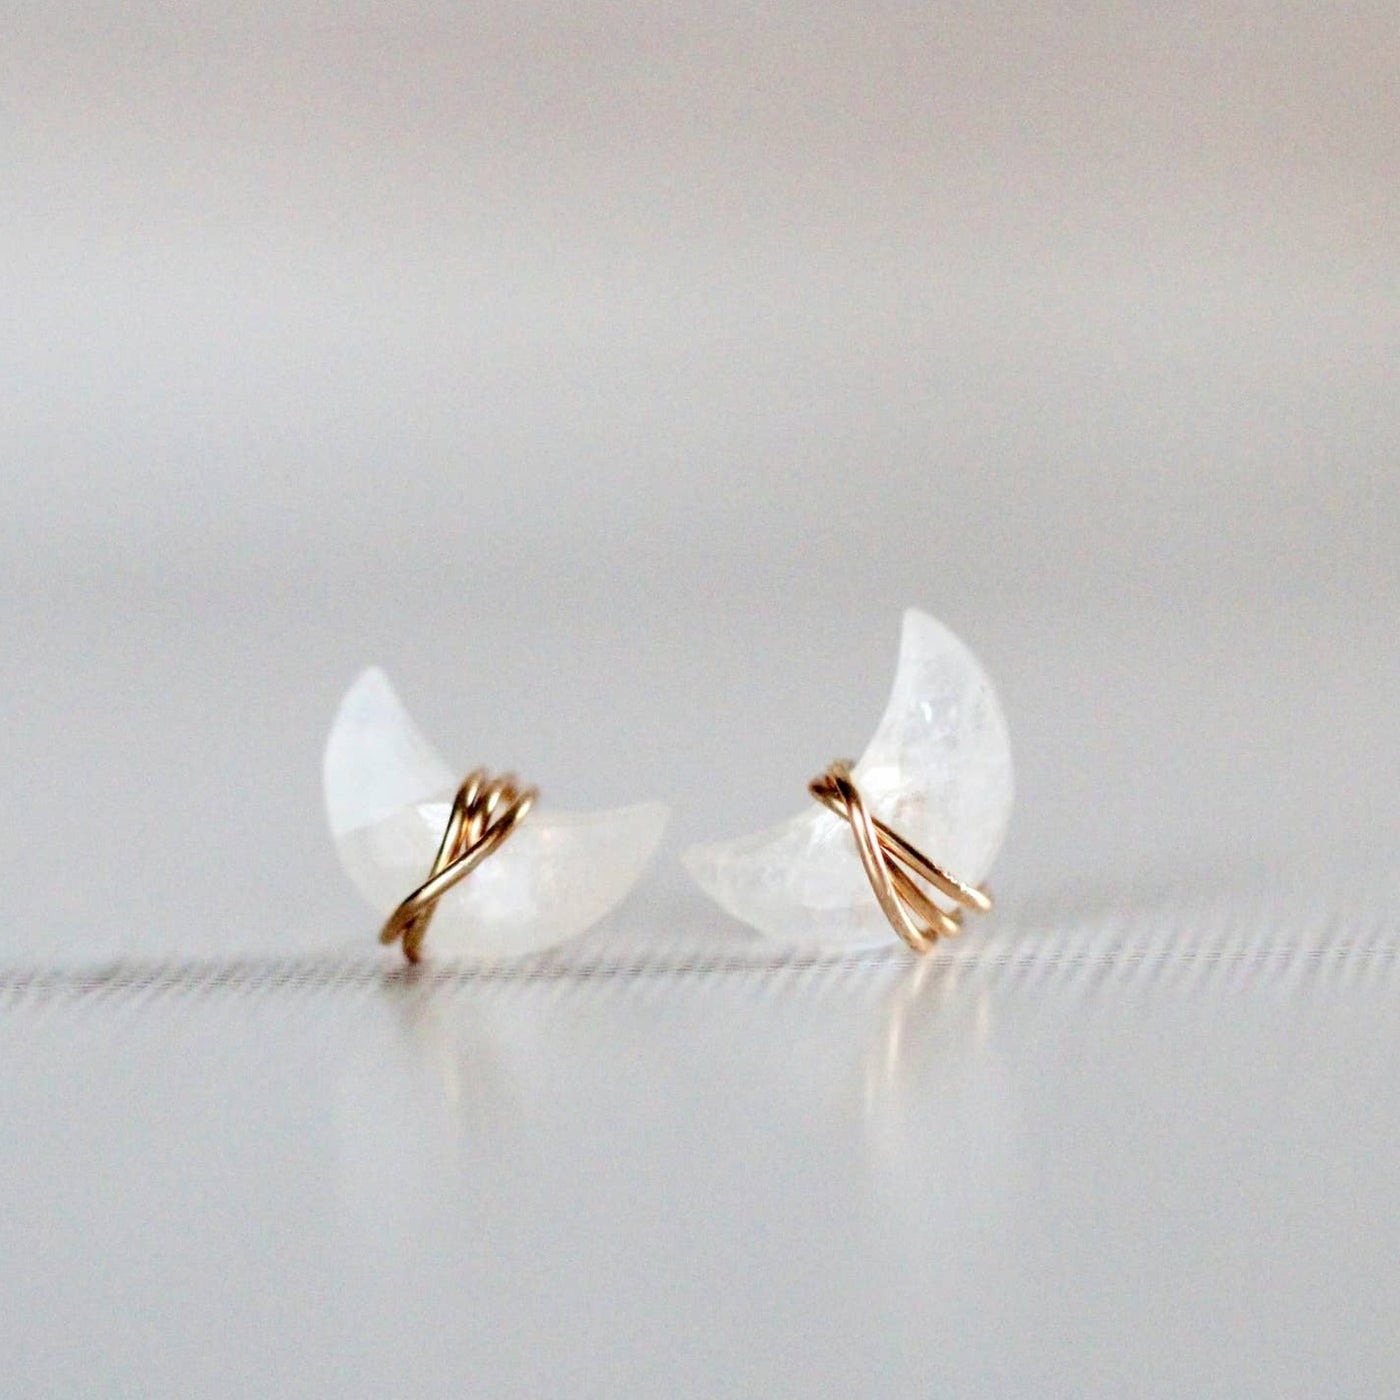 earring studs with moonstone gemstones in a moon shape wrapped in 14k gold fill earring wire